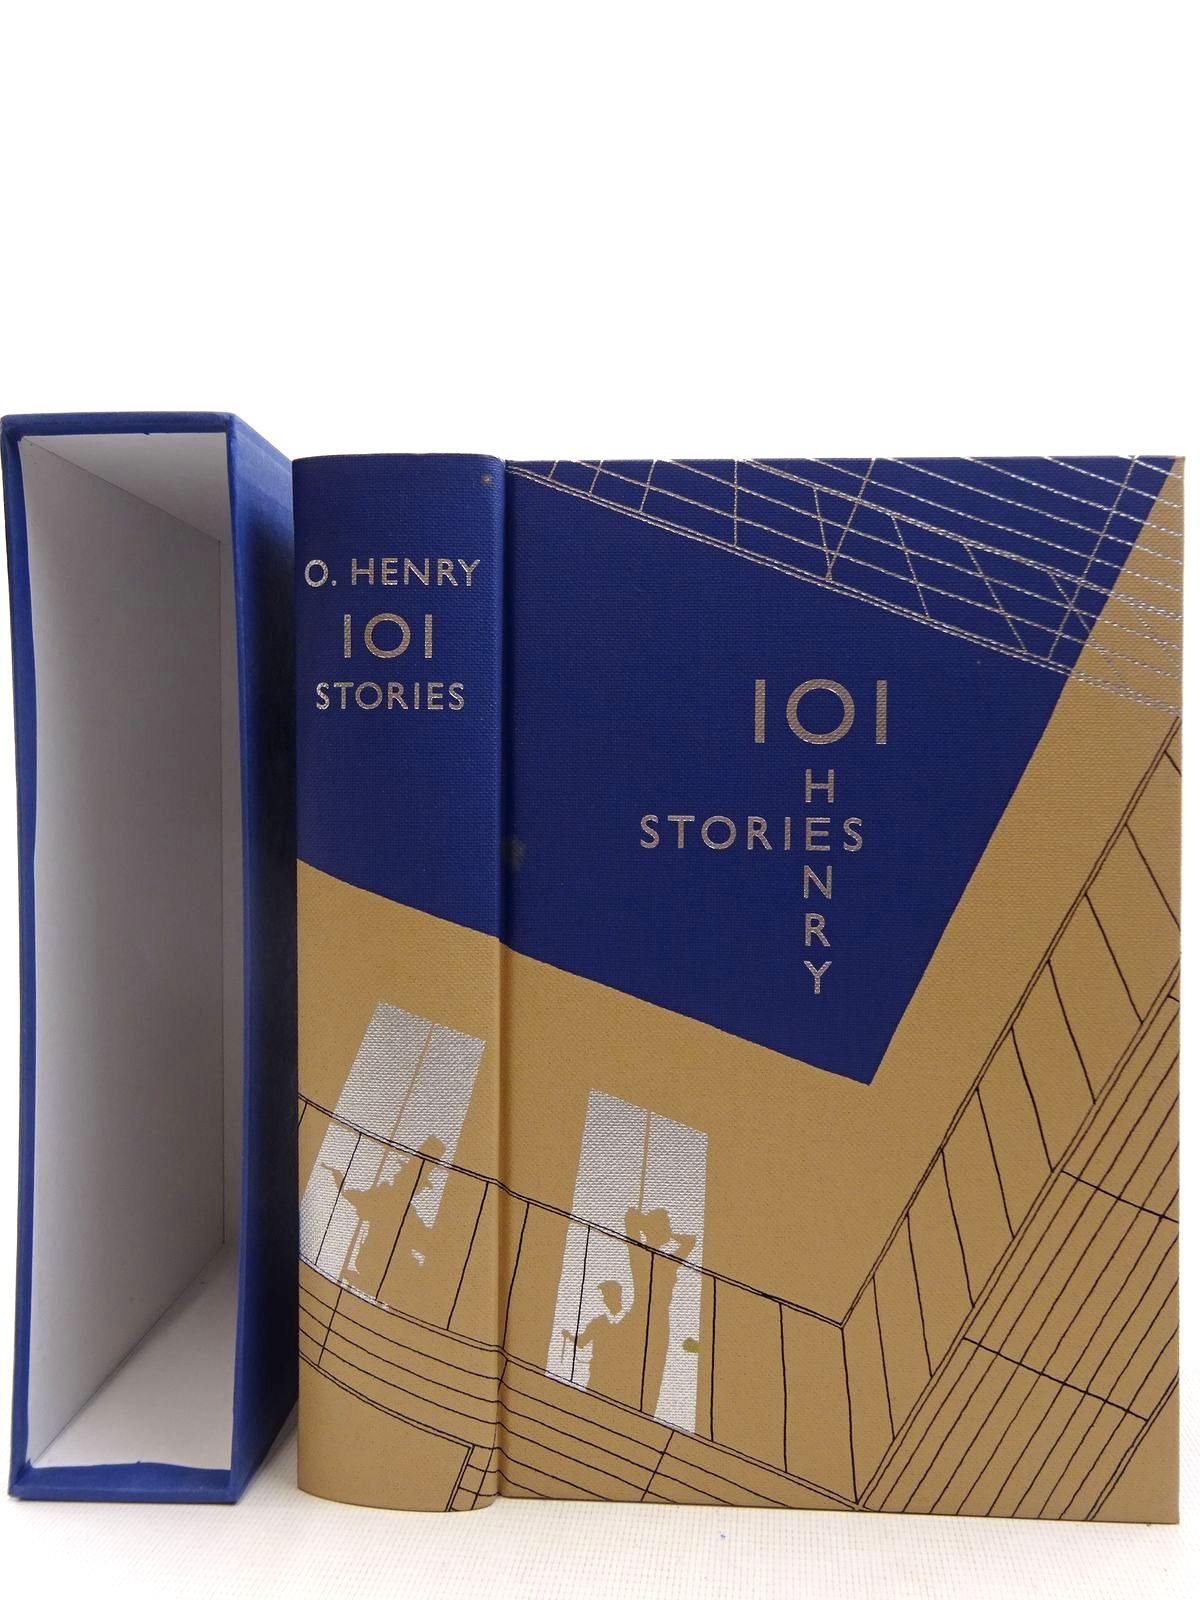 Photo of 101 STORIES written by Henry, O.
Chappell, Fred illustrated by Waters, Rod published by Folio Society (STOCK CODE: 2128293)  for sale by Stella & Rose's Books